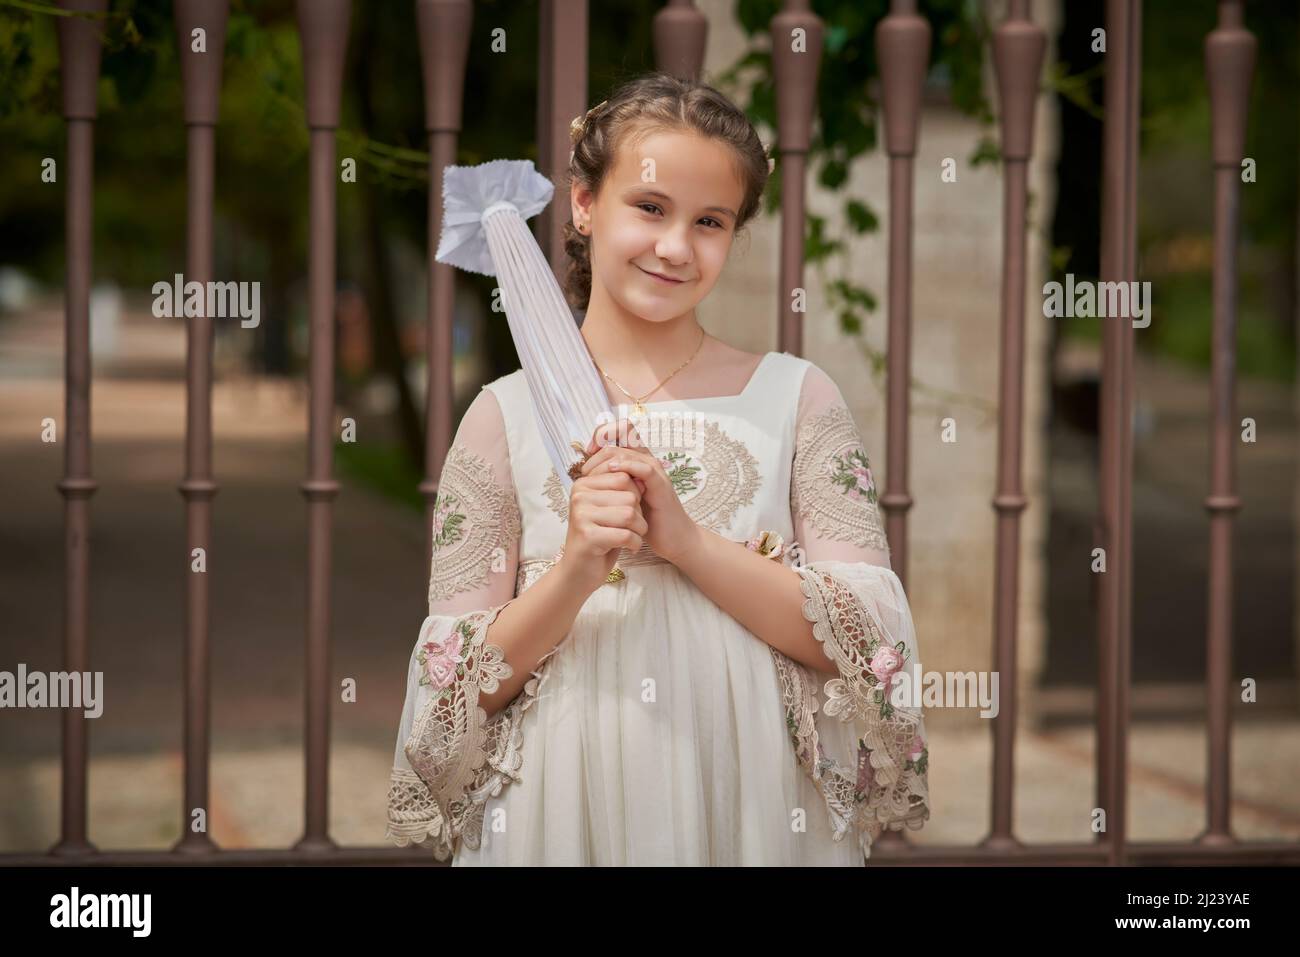 Communion girl posing with a white umbrella in a park Stock Photo